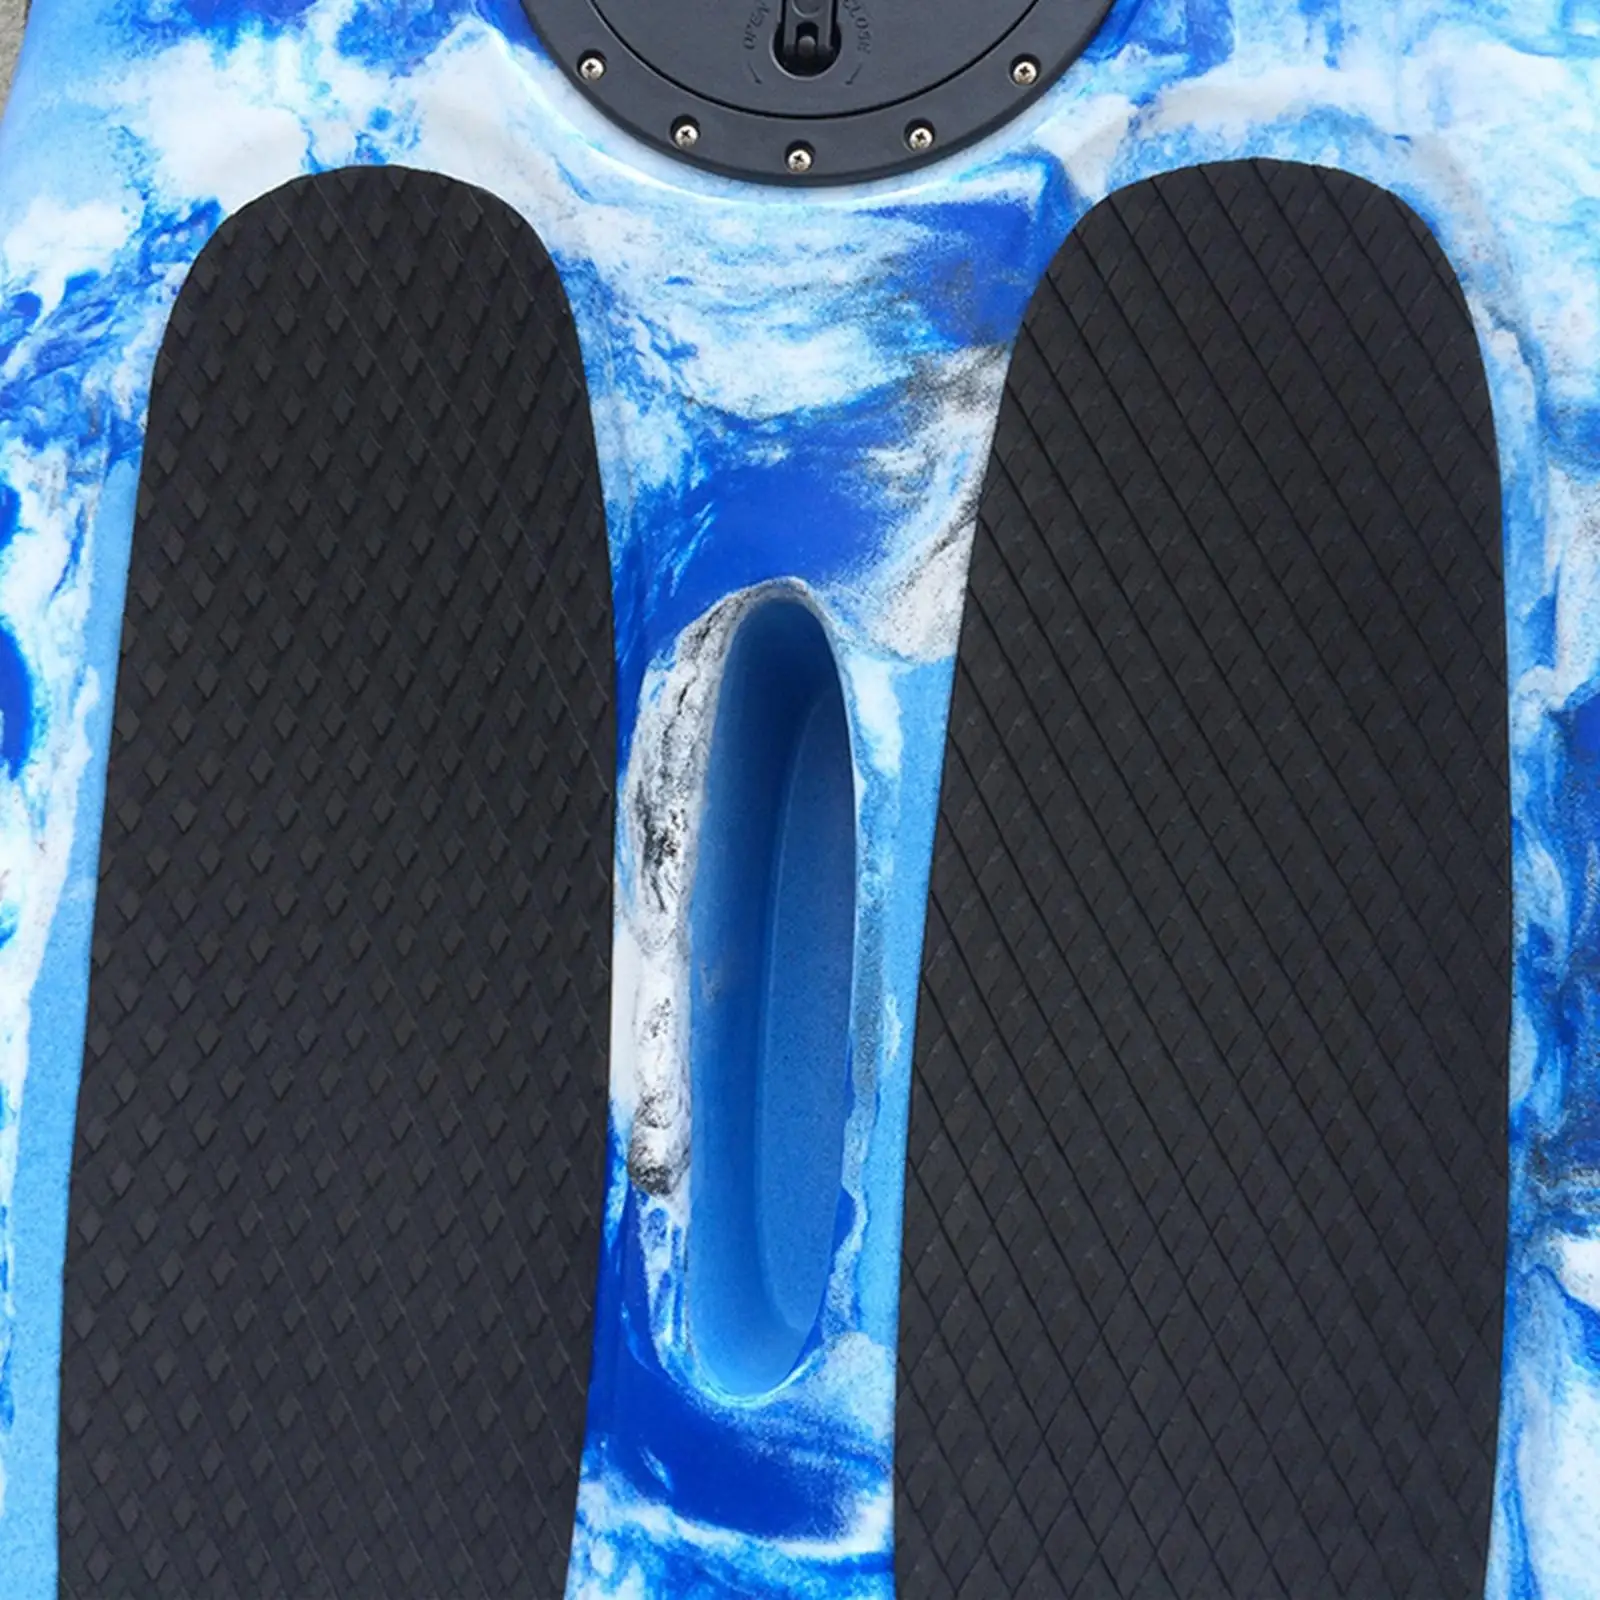 Surfboard Traction Pad Deck Grip Mat Surfing Padding Paddle Board Surf DIY